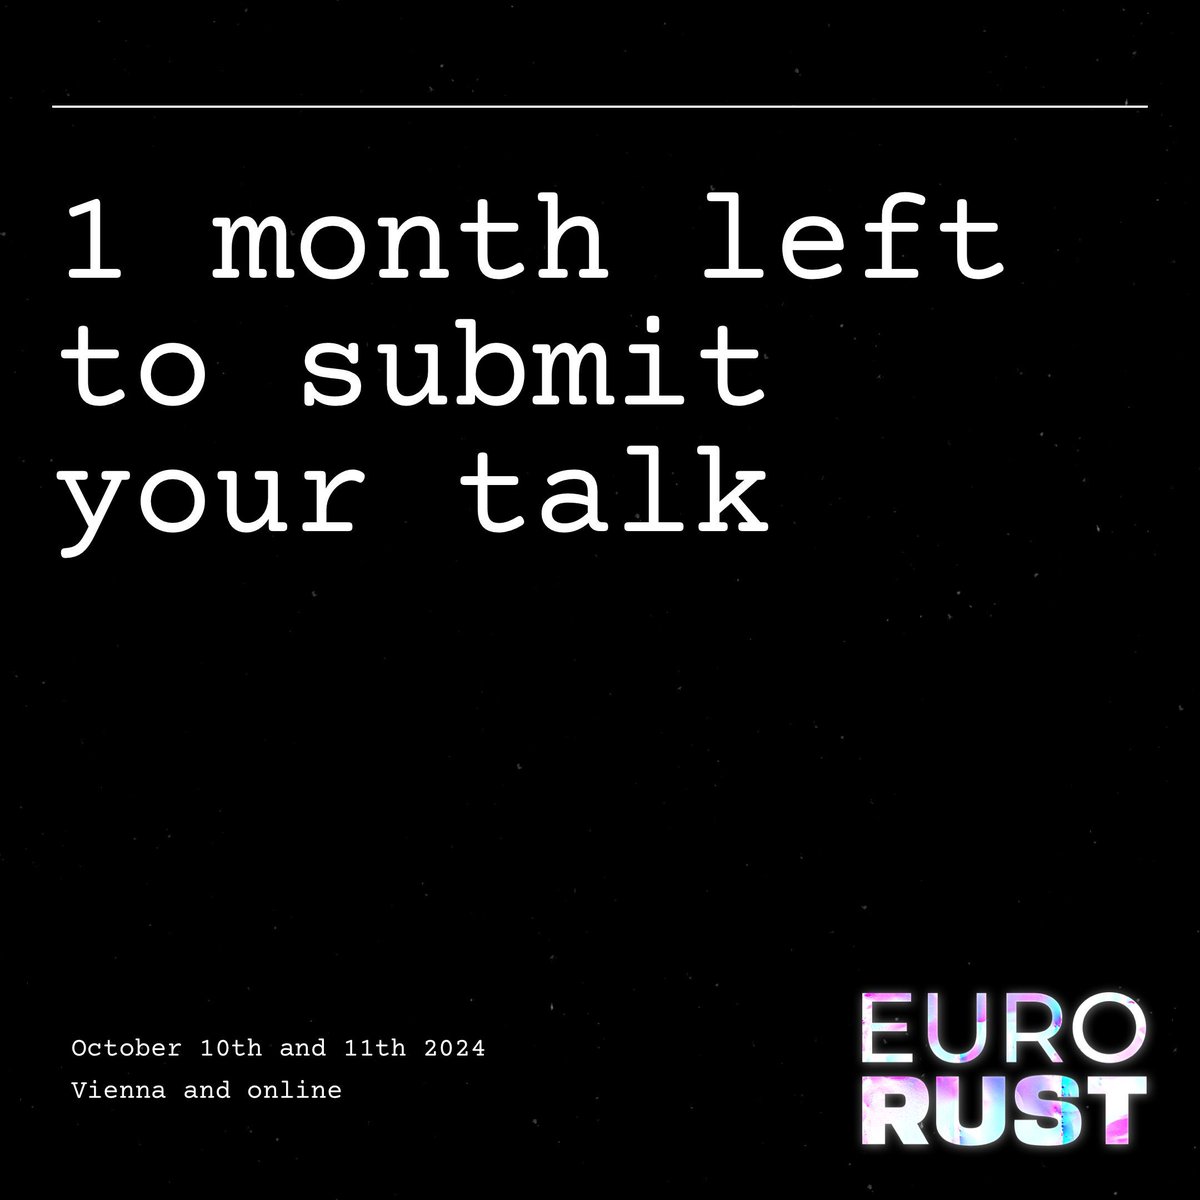 Our CfP is closing in just one month! ⏳ Make sure you submit your talk proposal before June 3rd, for a chance to speak at #eurorust24. 🦀 ➡️ buff.ly/3JFiHp4